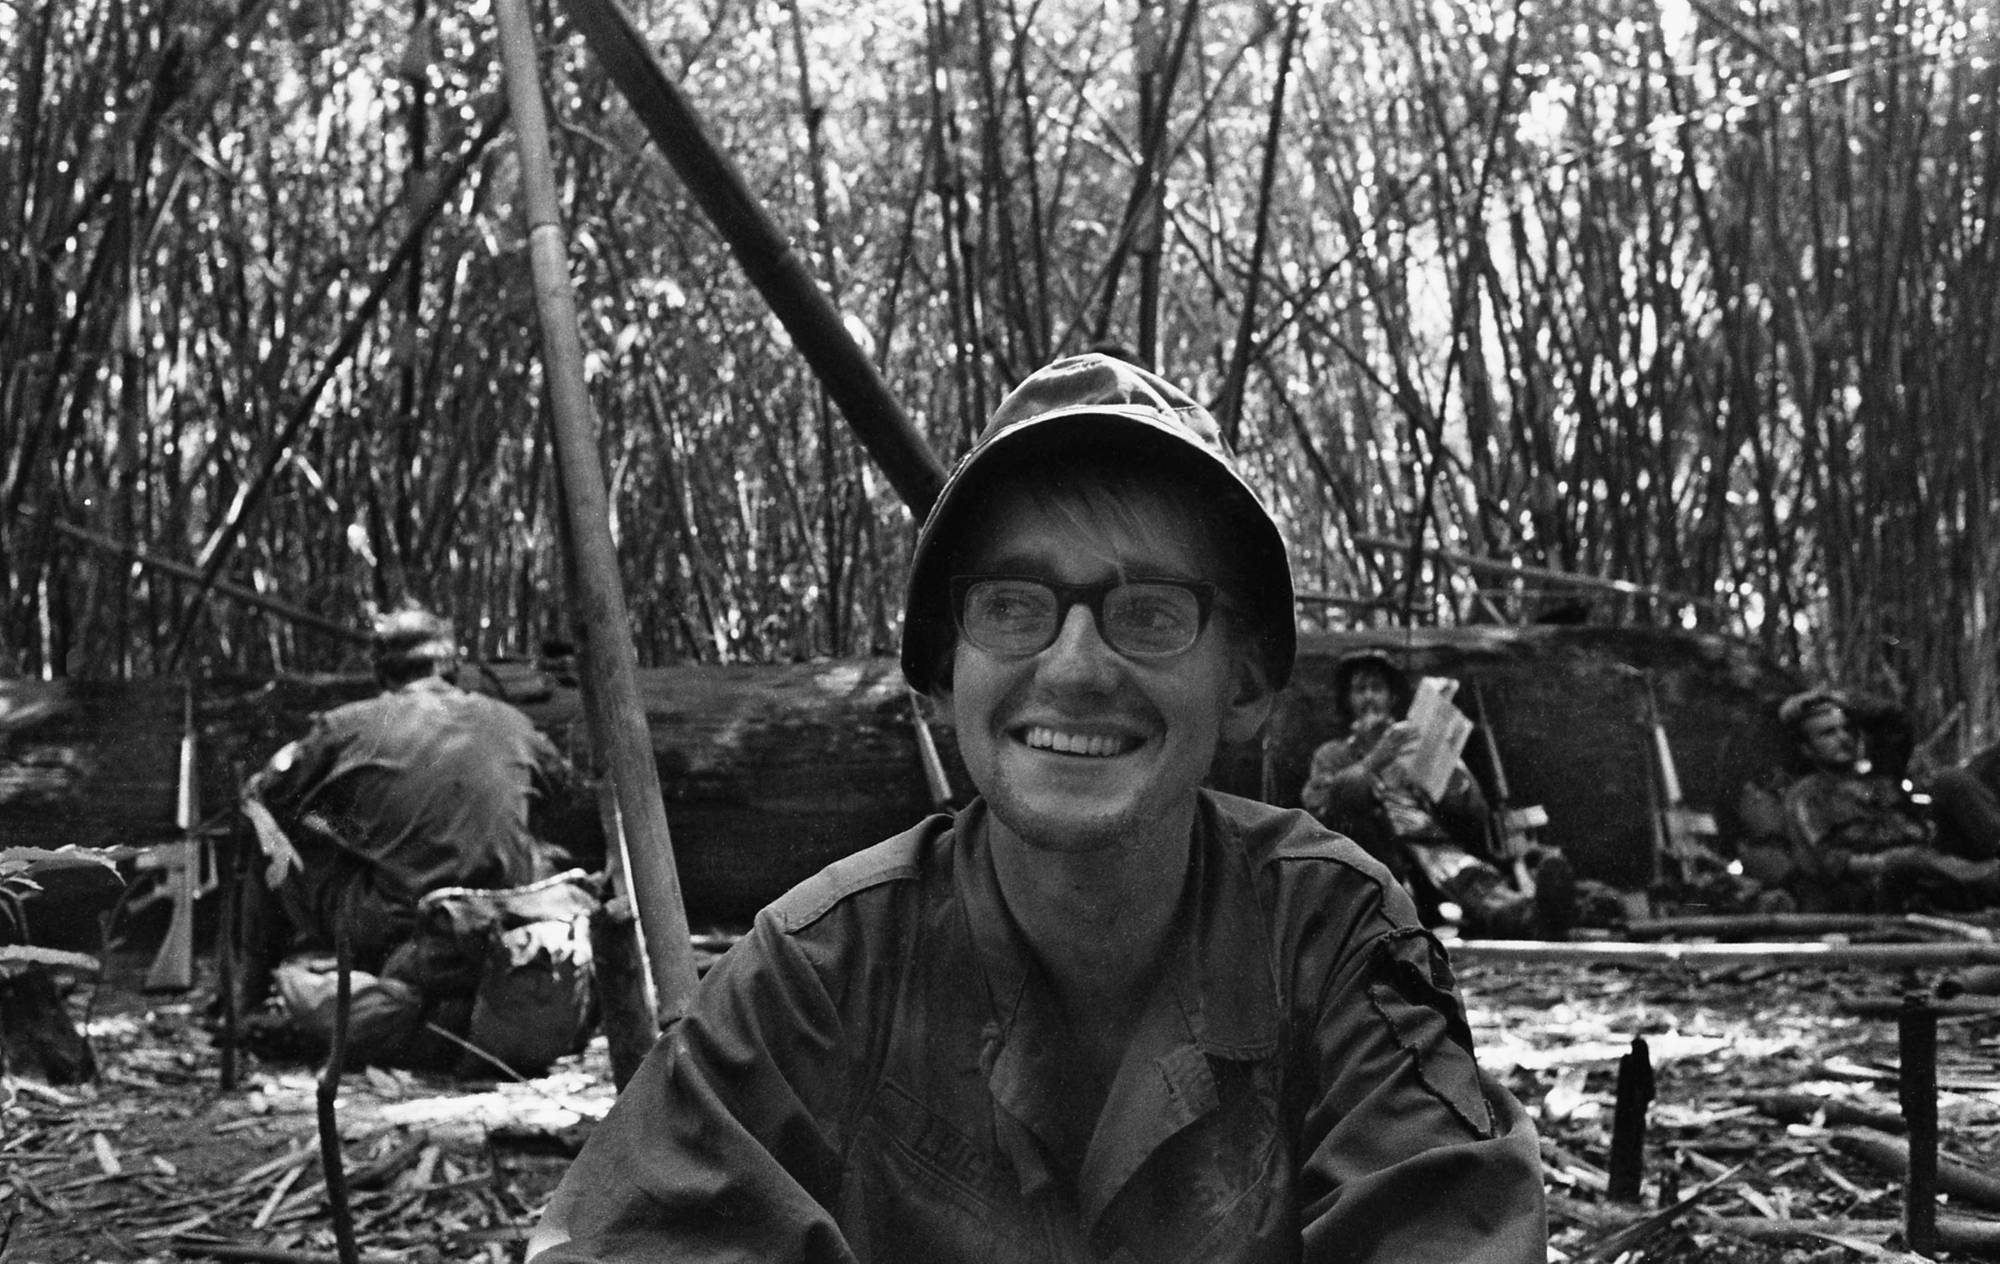 Portrait of a soldier smiling.